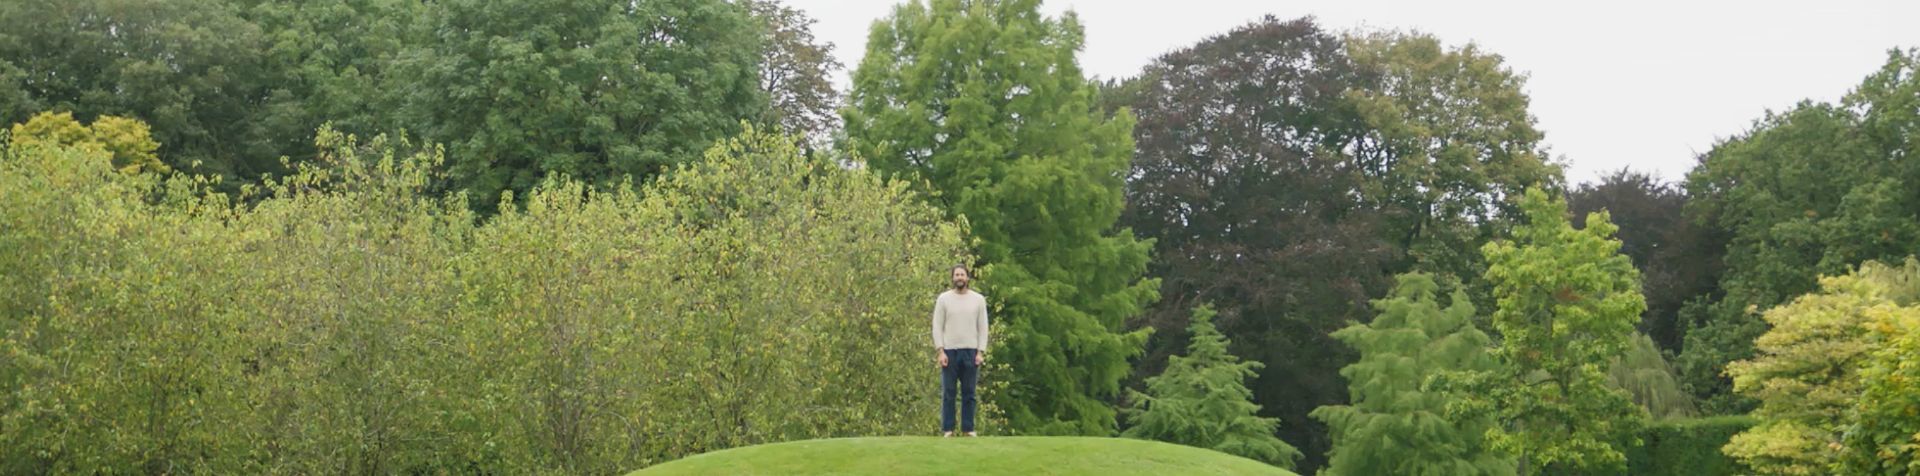 David de Rothschild standing on a green hill with trees behind him. He’s barefoot and is wearing a gray jumper and dark blue jeans.  